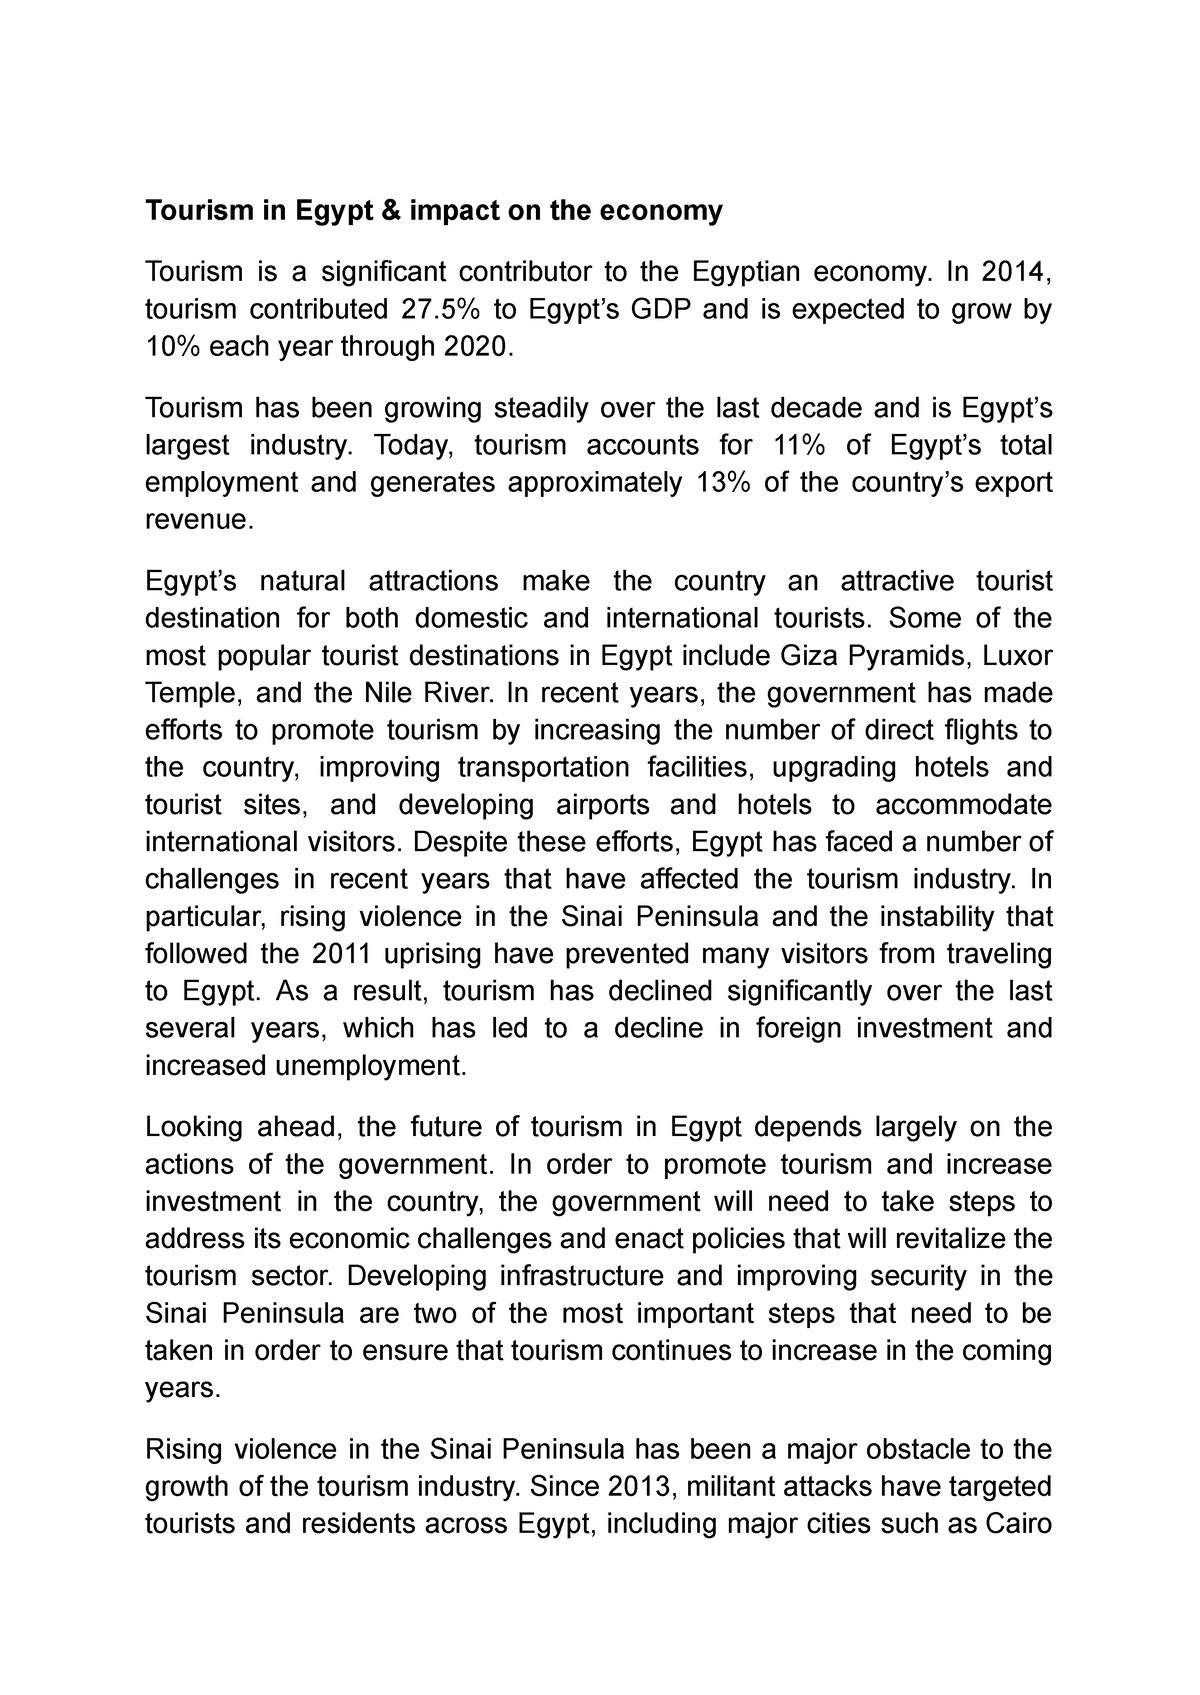 essay tourism in egypt